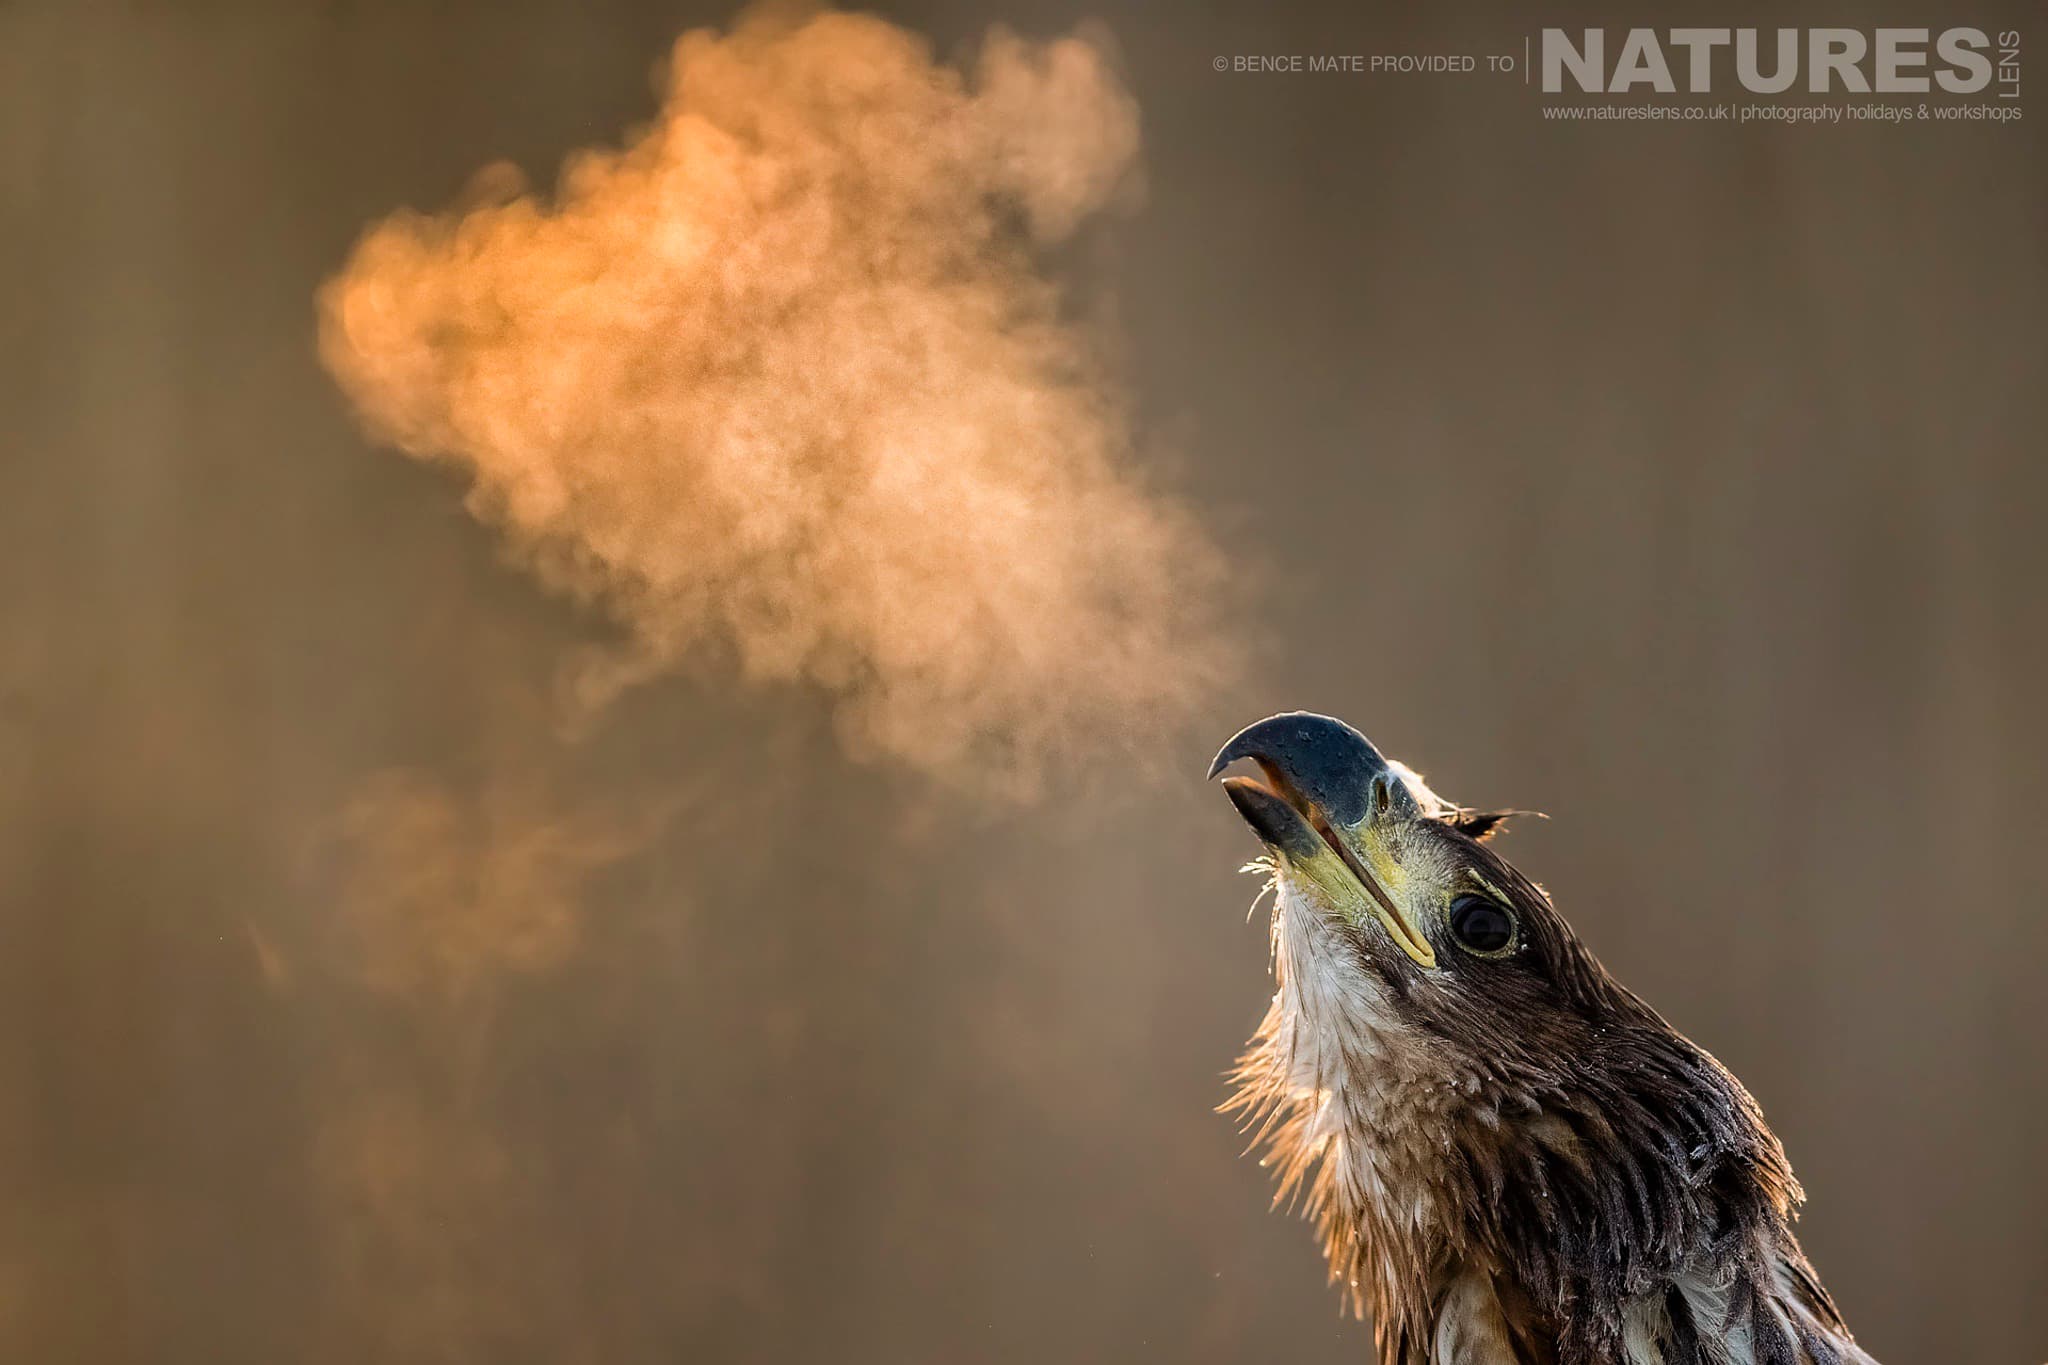 Breath of an Eagle at Bence Máté's Photography Hides during the Hungarian Winter